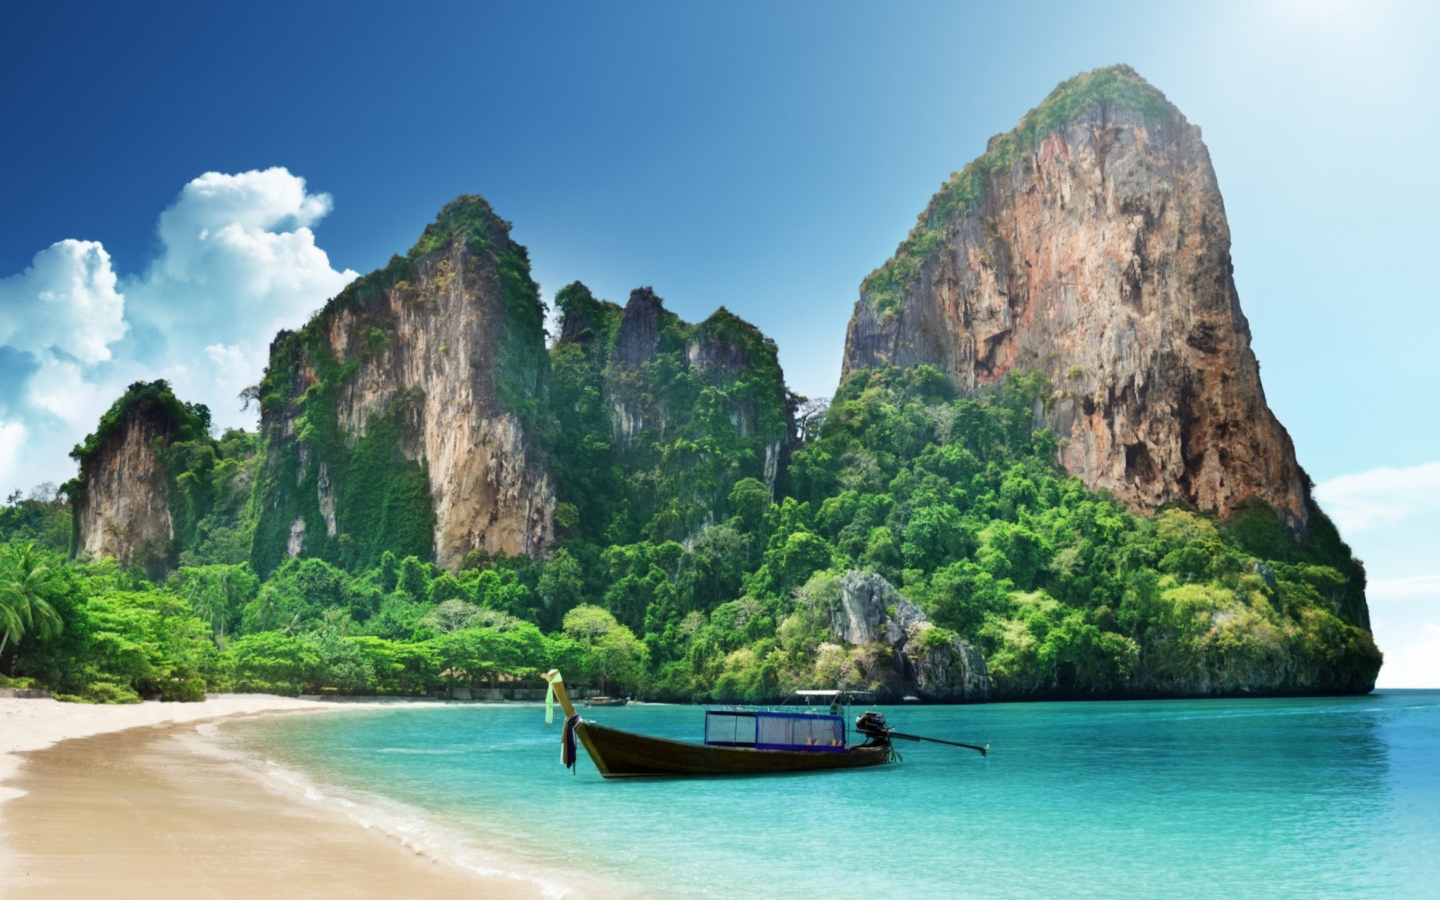 Das Boat And Rocks In Thailand Wallpaper 1440x900